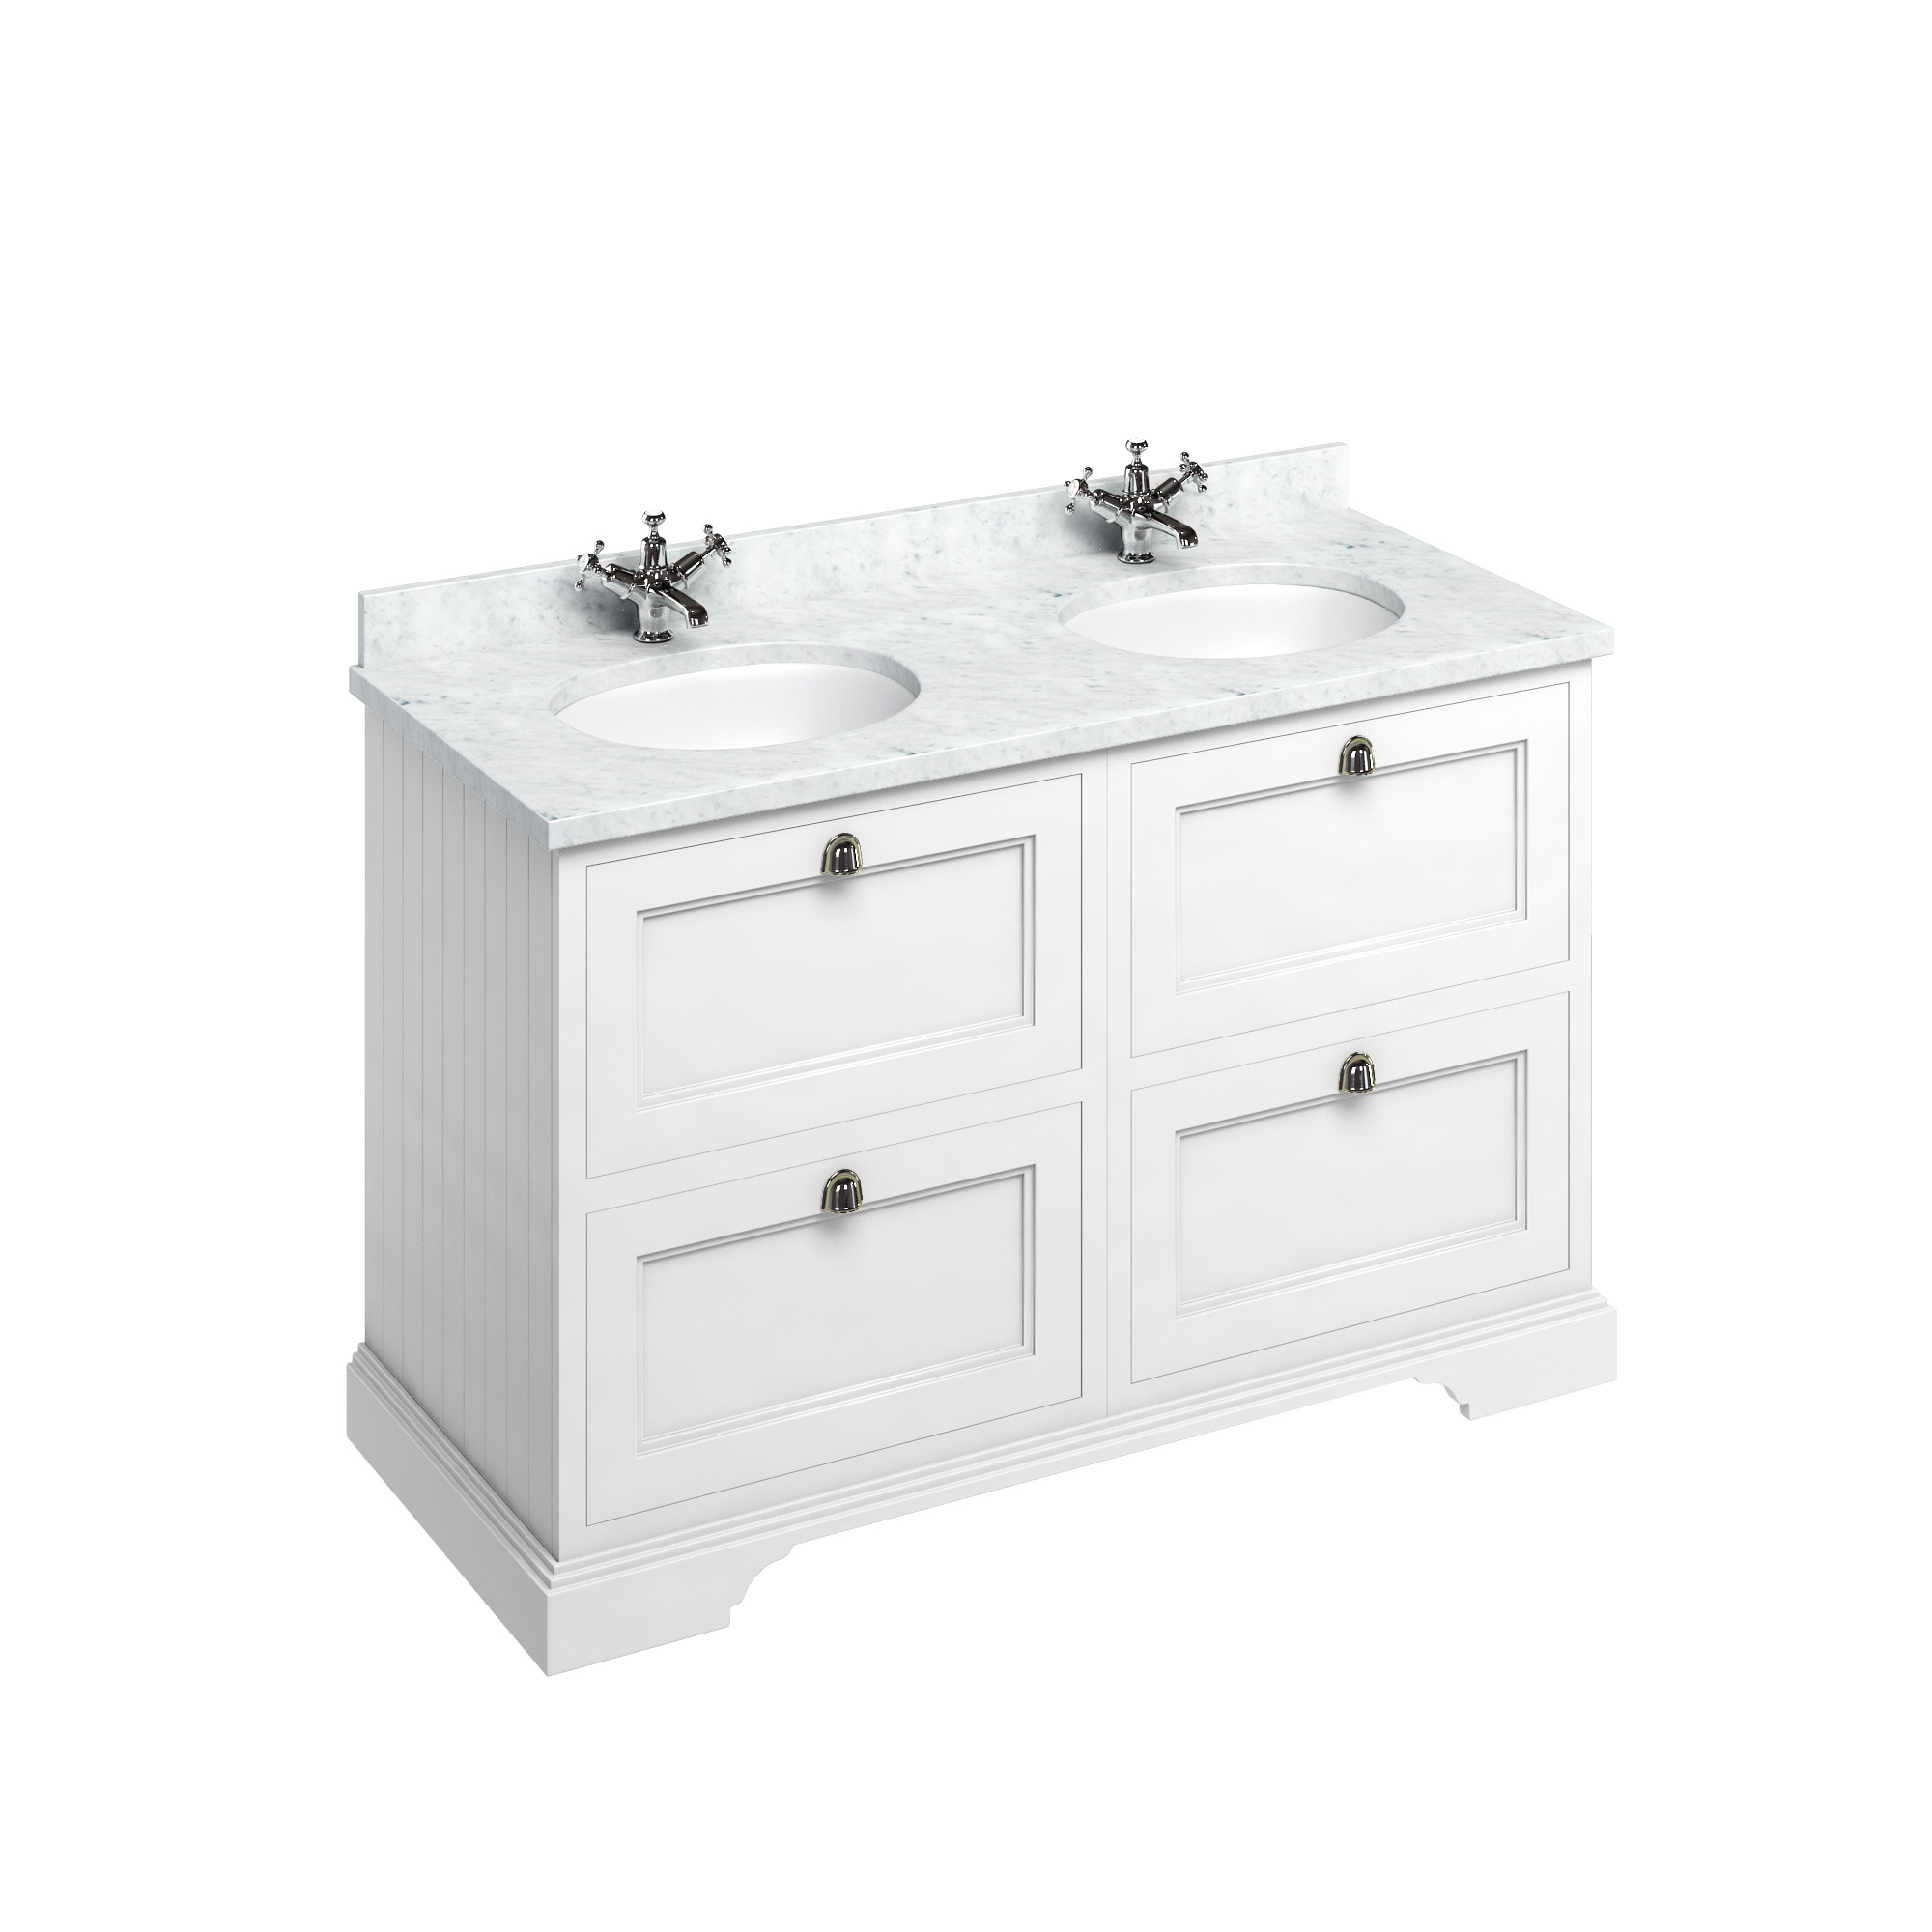 Freestanding 130 Vanity Unit with drawers - Matt White and Minerva Carrara white worktop with two integrated white basins